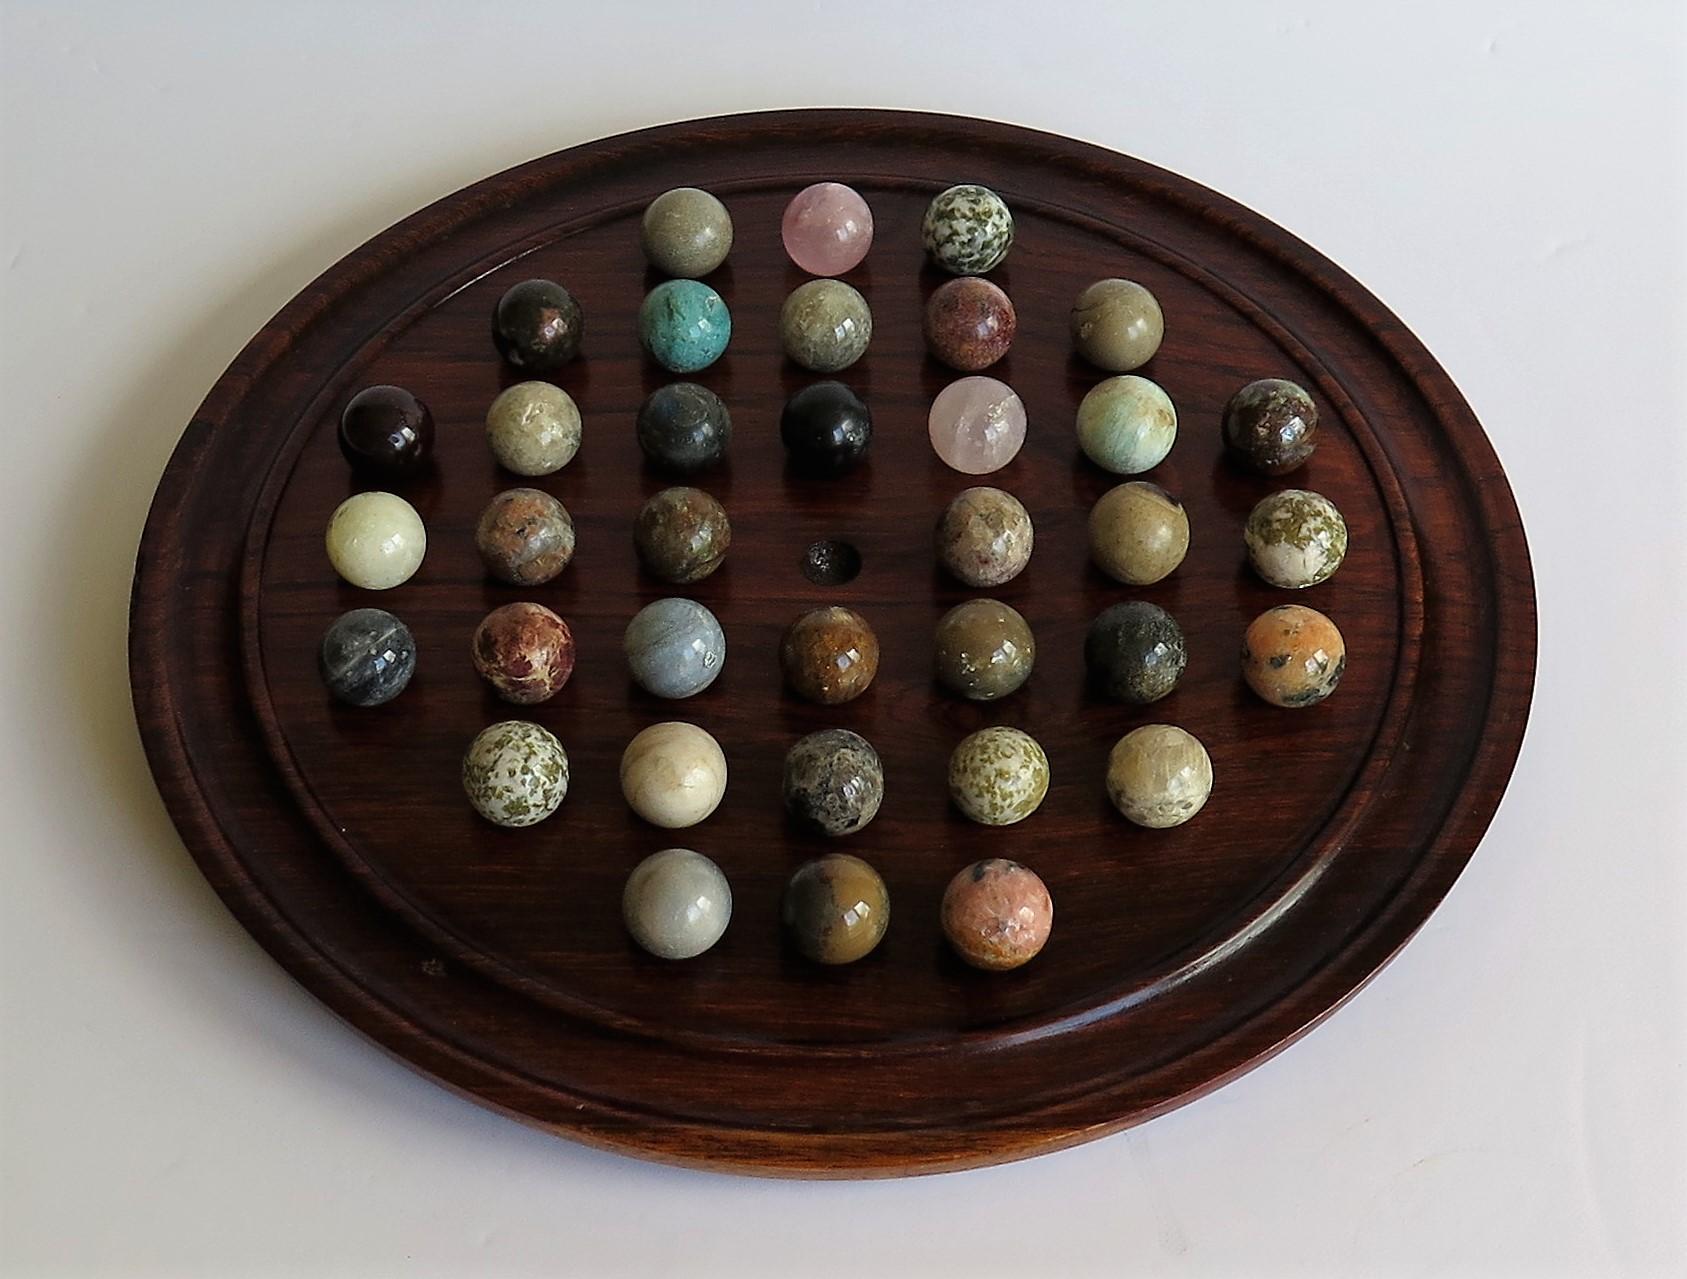 This is a complete Game of 37 hole Marble Solitaire with a polished hardwood board and 36 beautiful individual agate marbles, which we date to the early 20th century.

The circular turned board is made of Hardwood with a gallery to the outer rim.